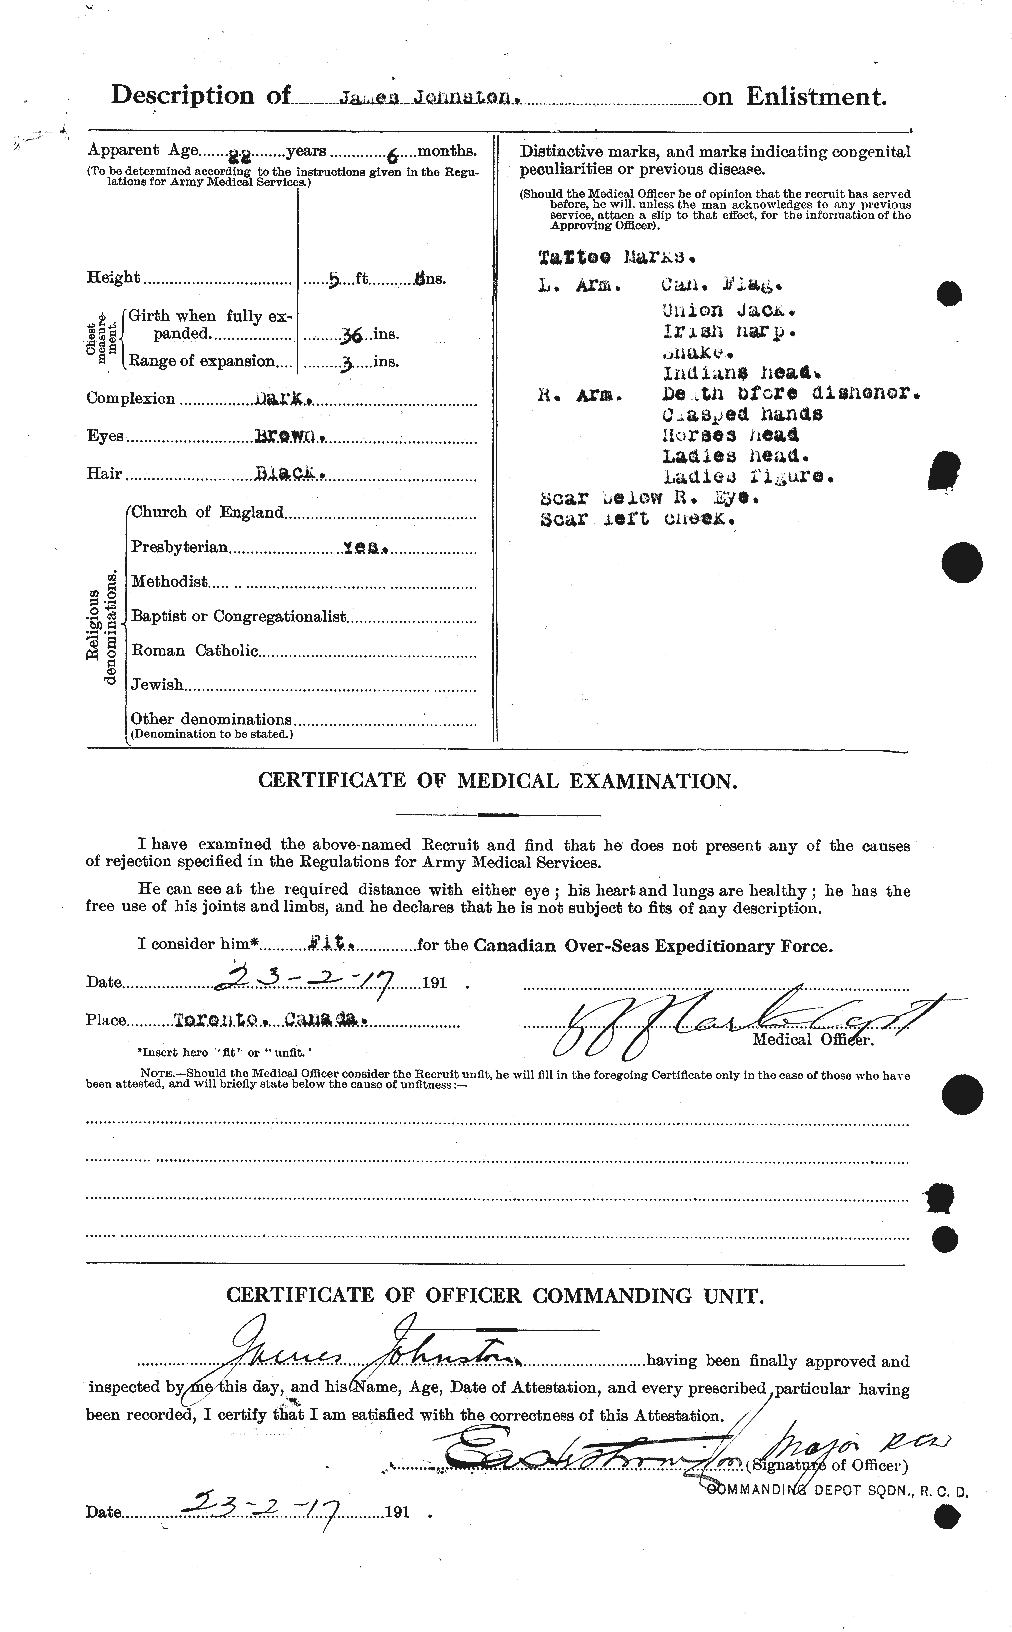 Personnel Records of the First World War - CEF 422689b